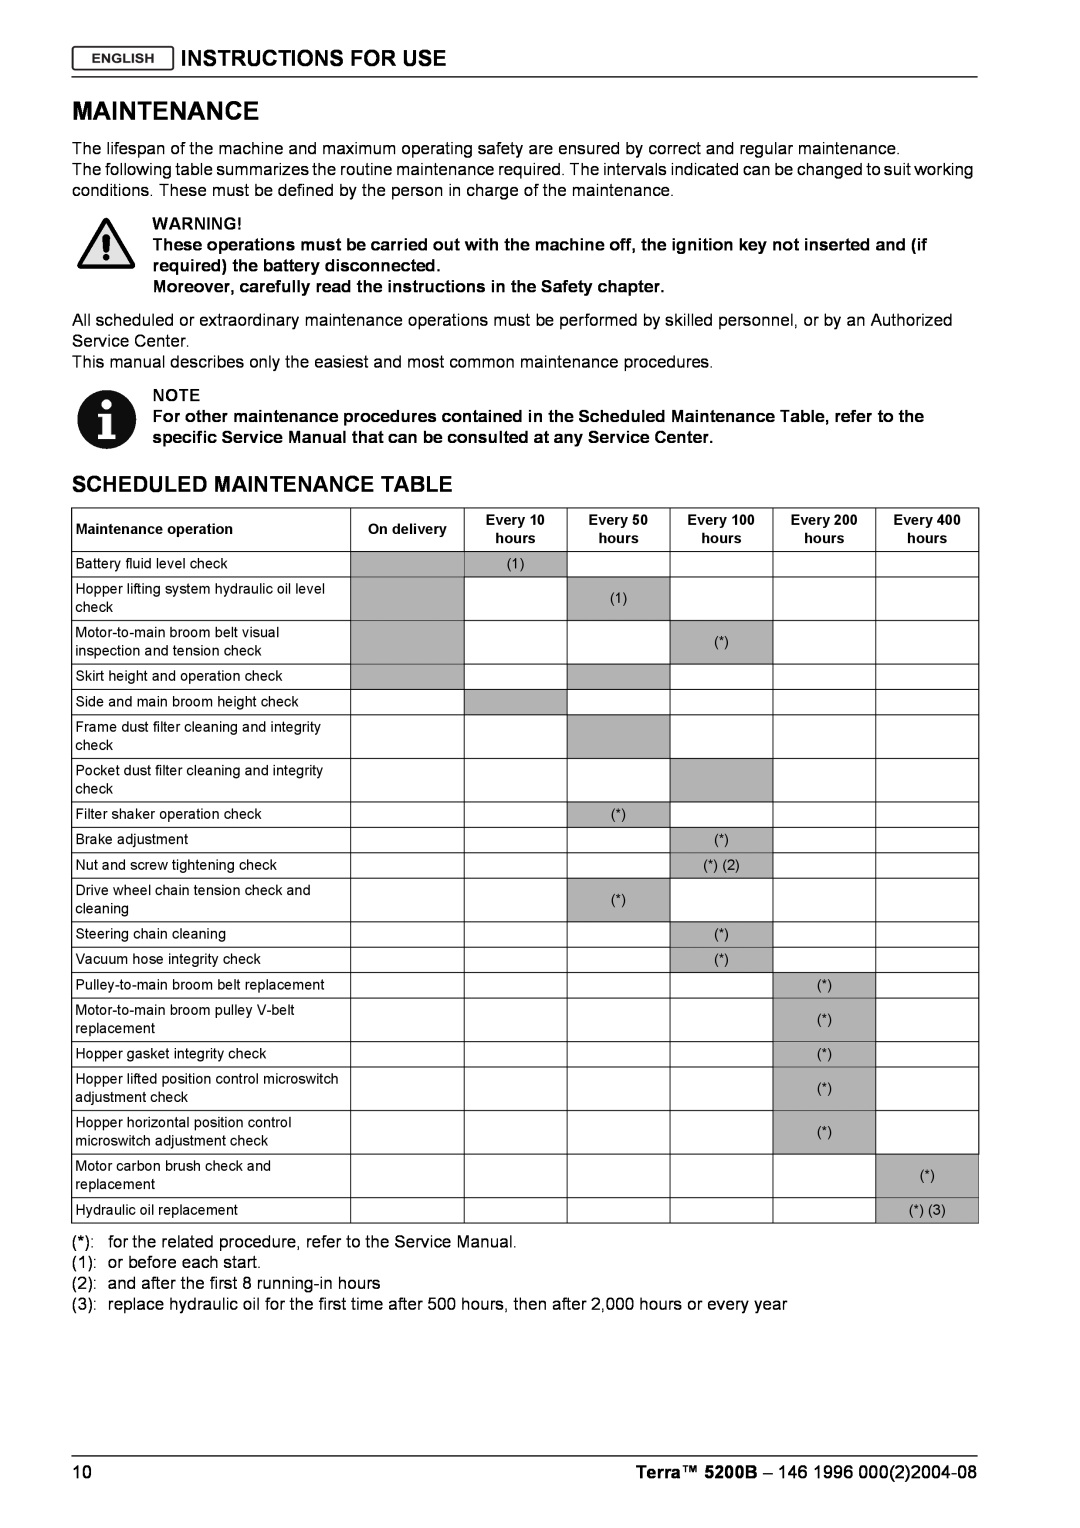 Nilfisk-Advance America 5200B manual Scheduled Maintenance Table, Instructions For Use 